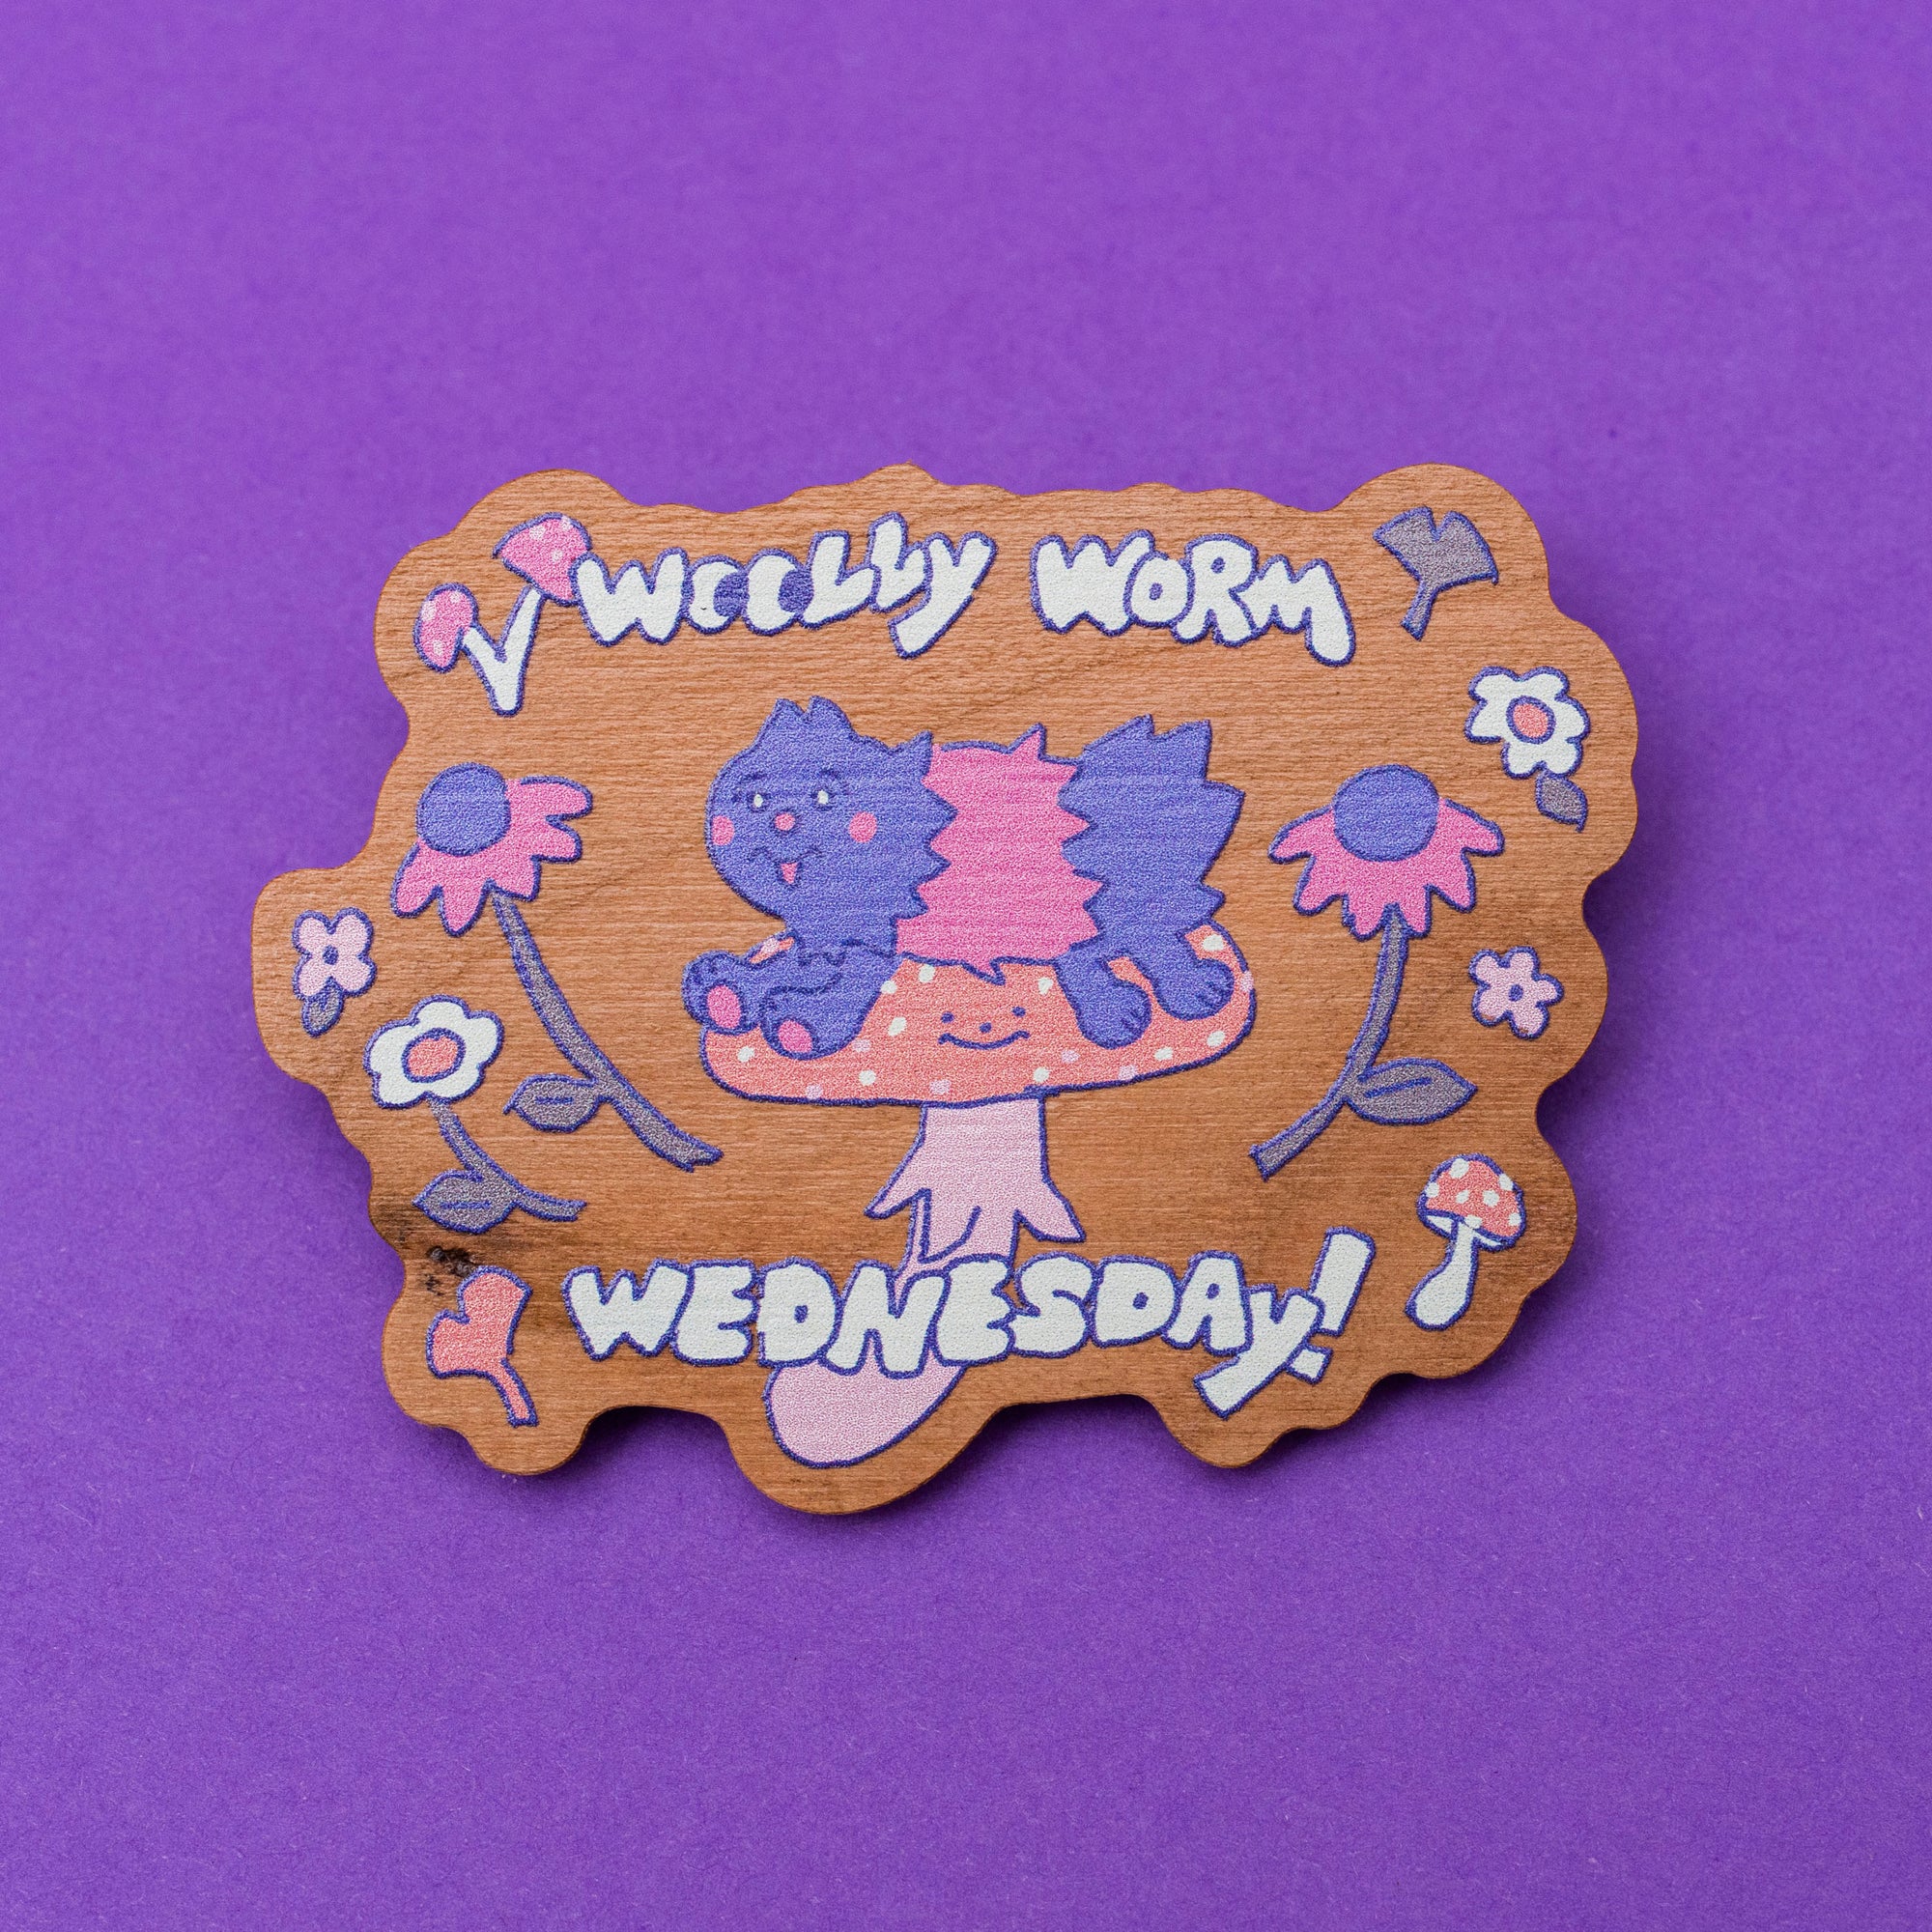 Woolly Worm Wednesday Wood Pin